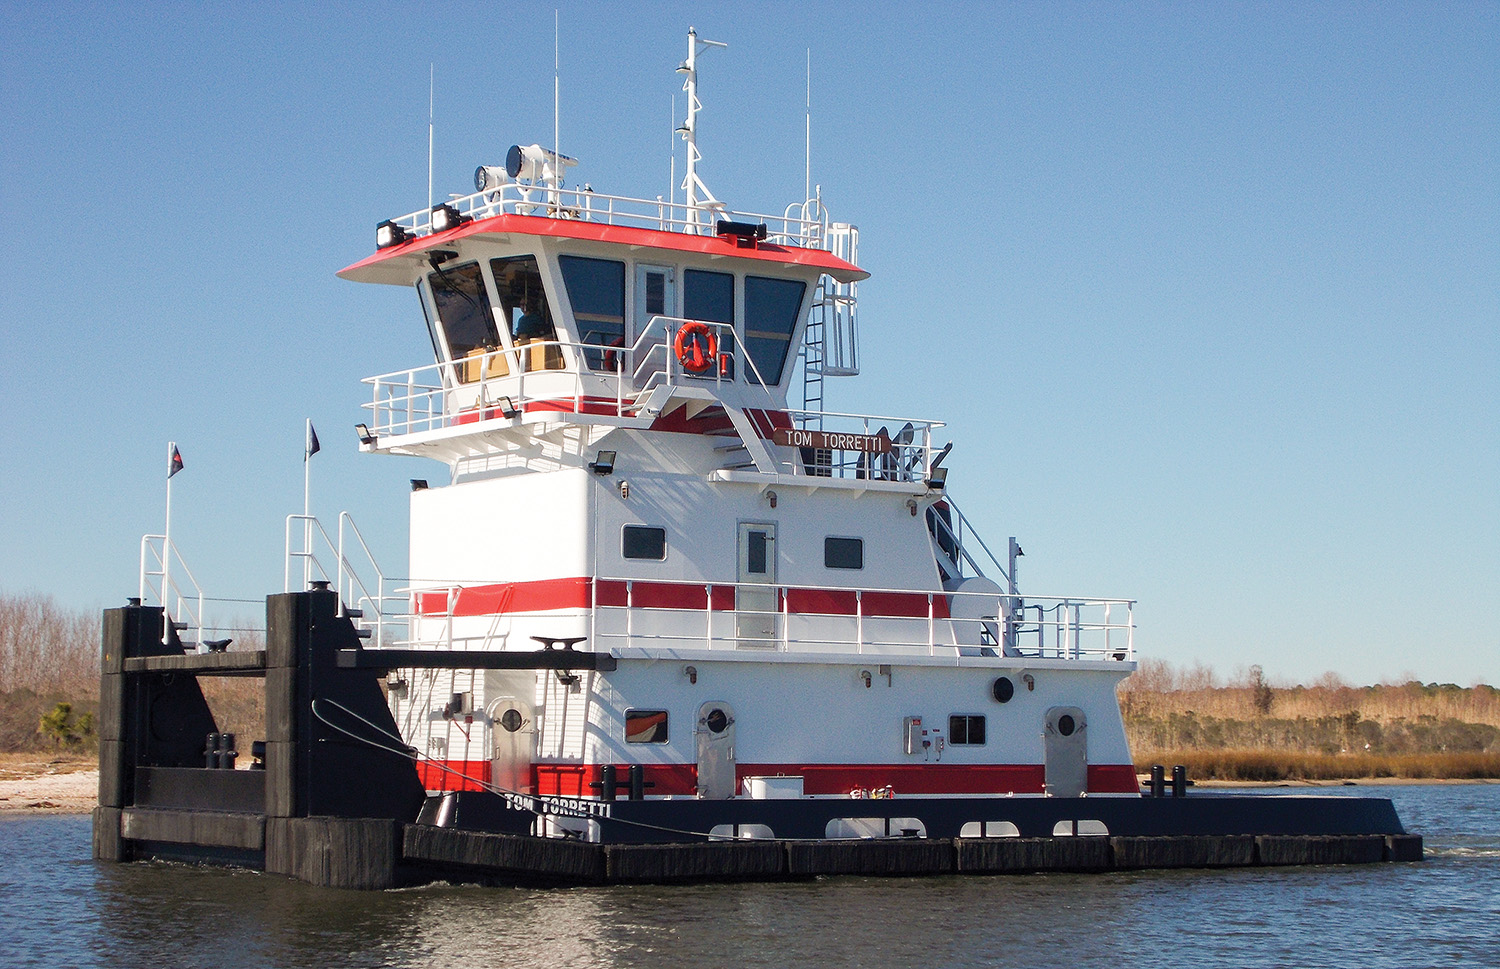 The mv. Tom Torretti is powered by Mitsubishi Tier III diesel engines.